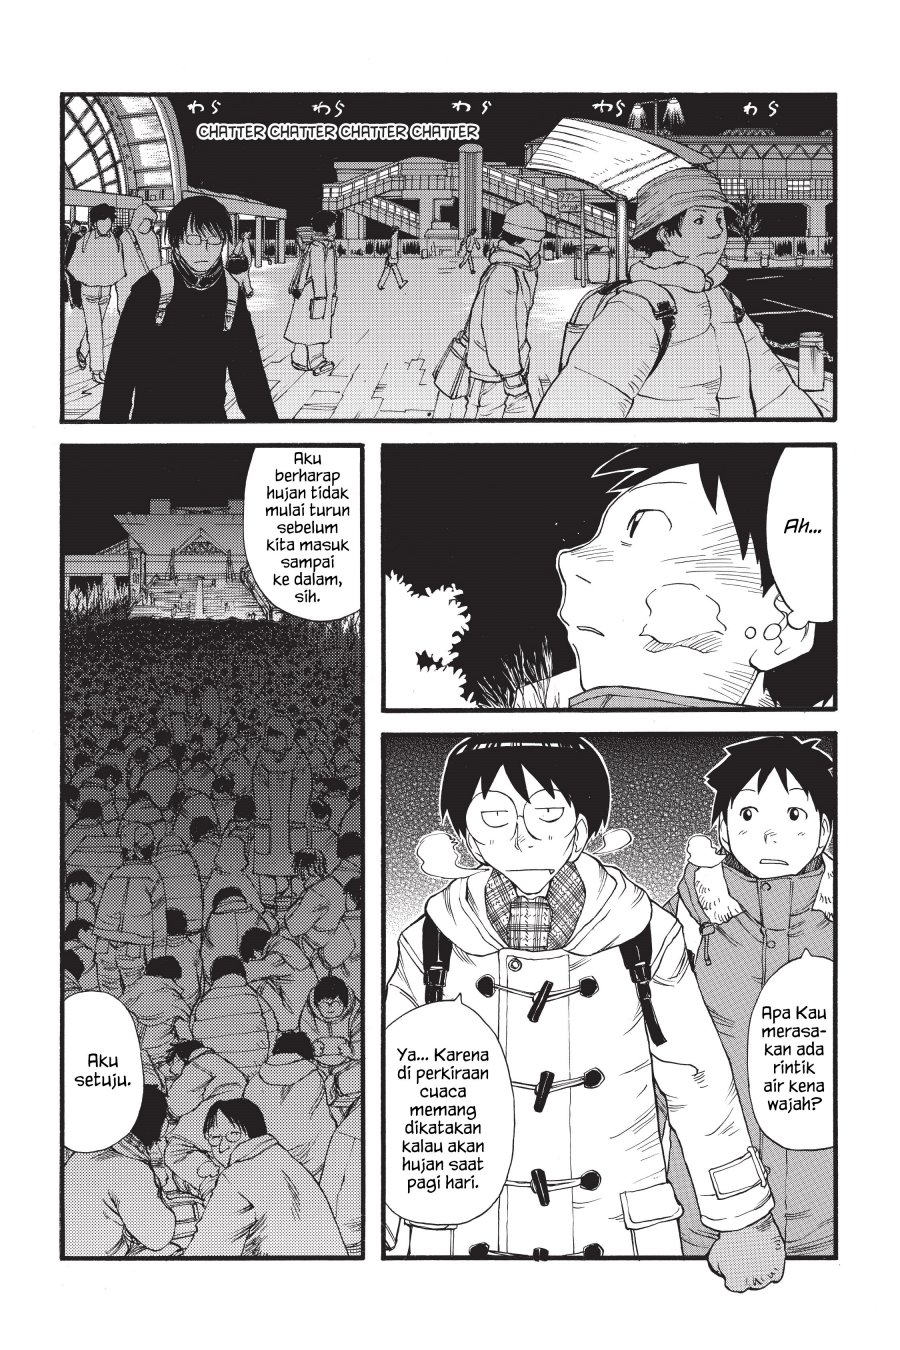 Genshiken – The Society for the Study of Modern Visual Culture Chapter 09 Image 3